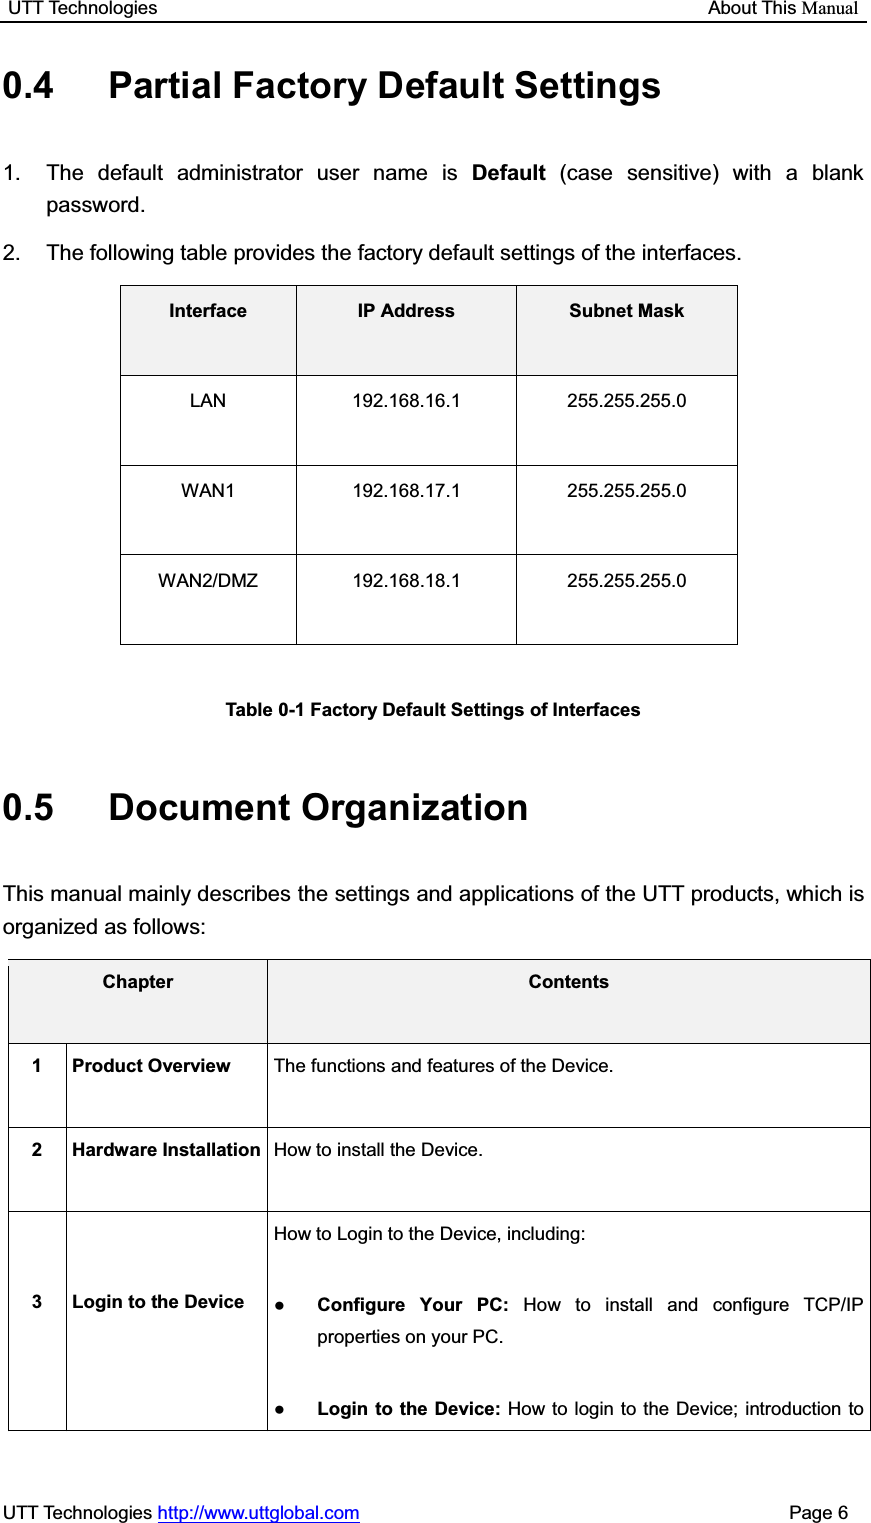 UTT Technologies                                                           About This ManualUTT Technologies http://www.uttglobal.com                                              Page 6 0.4  Partial Factory Default Settings   1.  The default administrator user name is Default (case sensitive) with a blank password. 2.  The following table provides the factory default settings of the interfaces. Interface IP Address Subnet MaskLAN 192.168.16.1 255.255.255.0 WAN1 192.168.17.1 255.255.255.0 WAN2/DMZ 192.168.18.1  255.255.255.0 Table 0-1 Factory Default Settings of Interfaces0.5 Document Organization This manual mainly describes the settings and applications of the UTT products, which is organized as follows:   Chapter Contents1 Product Overview  The functions and features of the Device. 2 Hardware Installation How to install the Device. 3  Login to the Device How to Login to the Device, including:   ƔConfigure Your PC: How to install and configure TCP/IP properties on your PC. ƔLogin to the Device: How to login to the Device; introduction to 